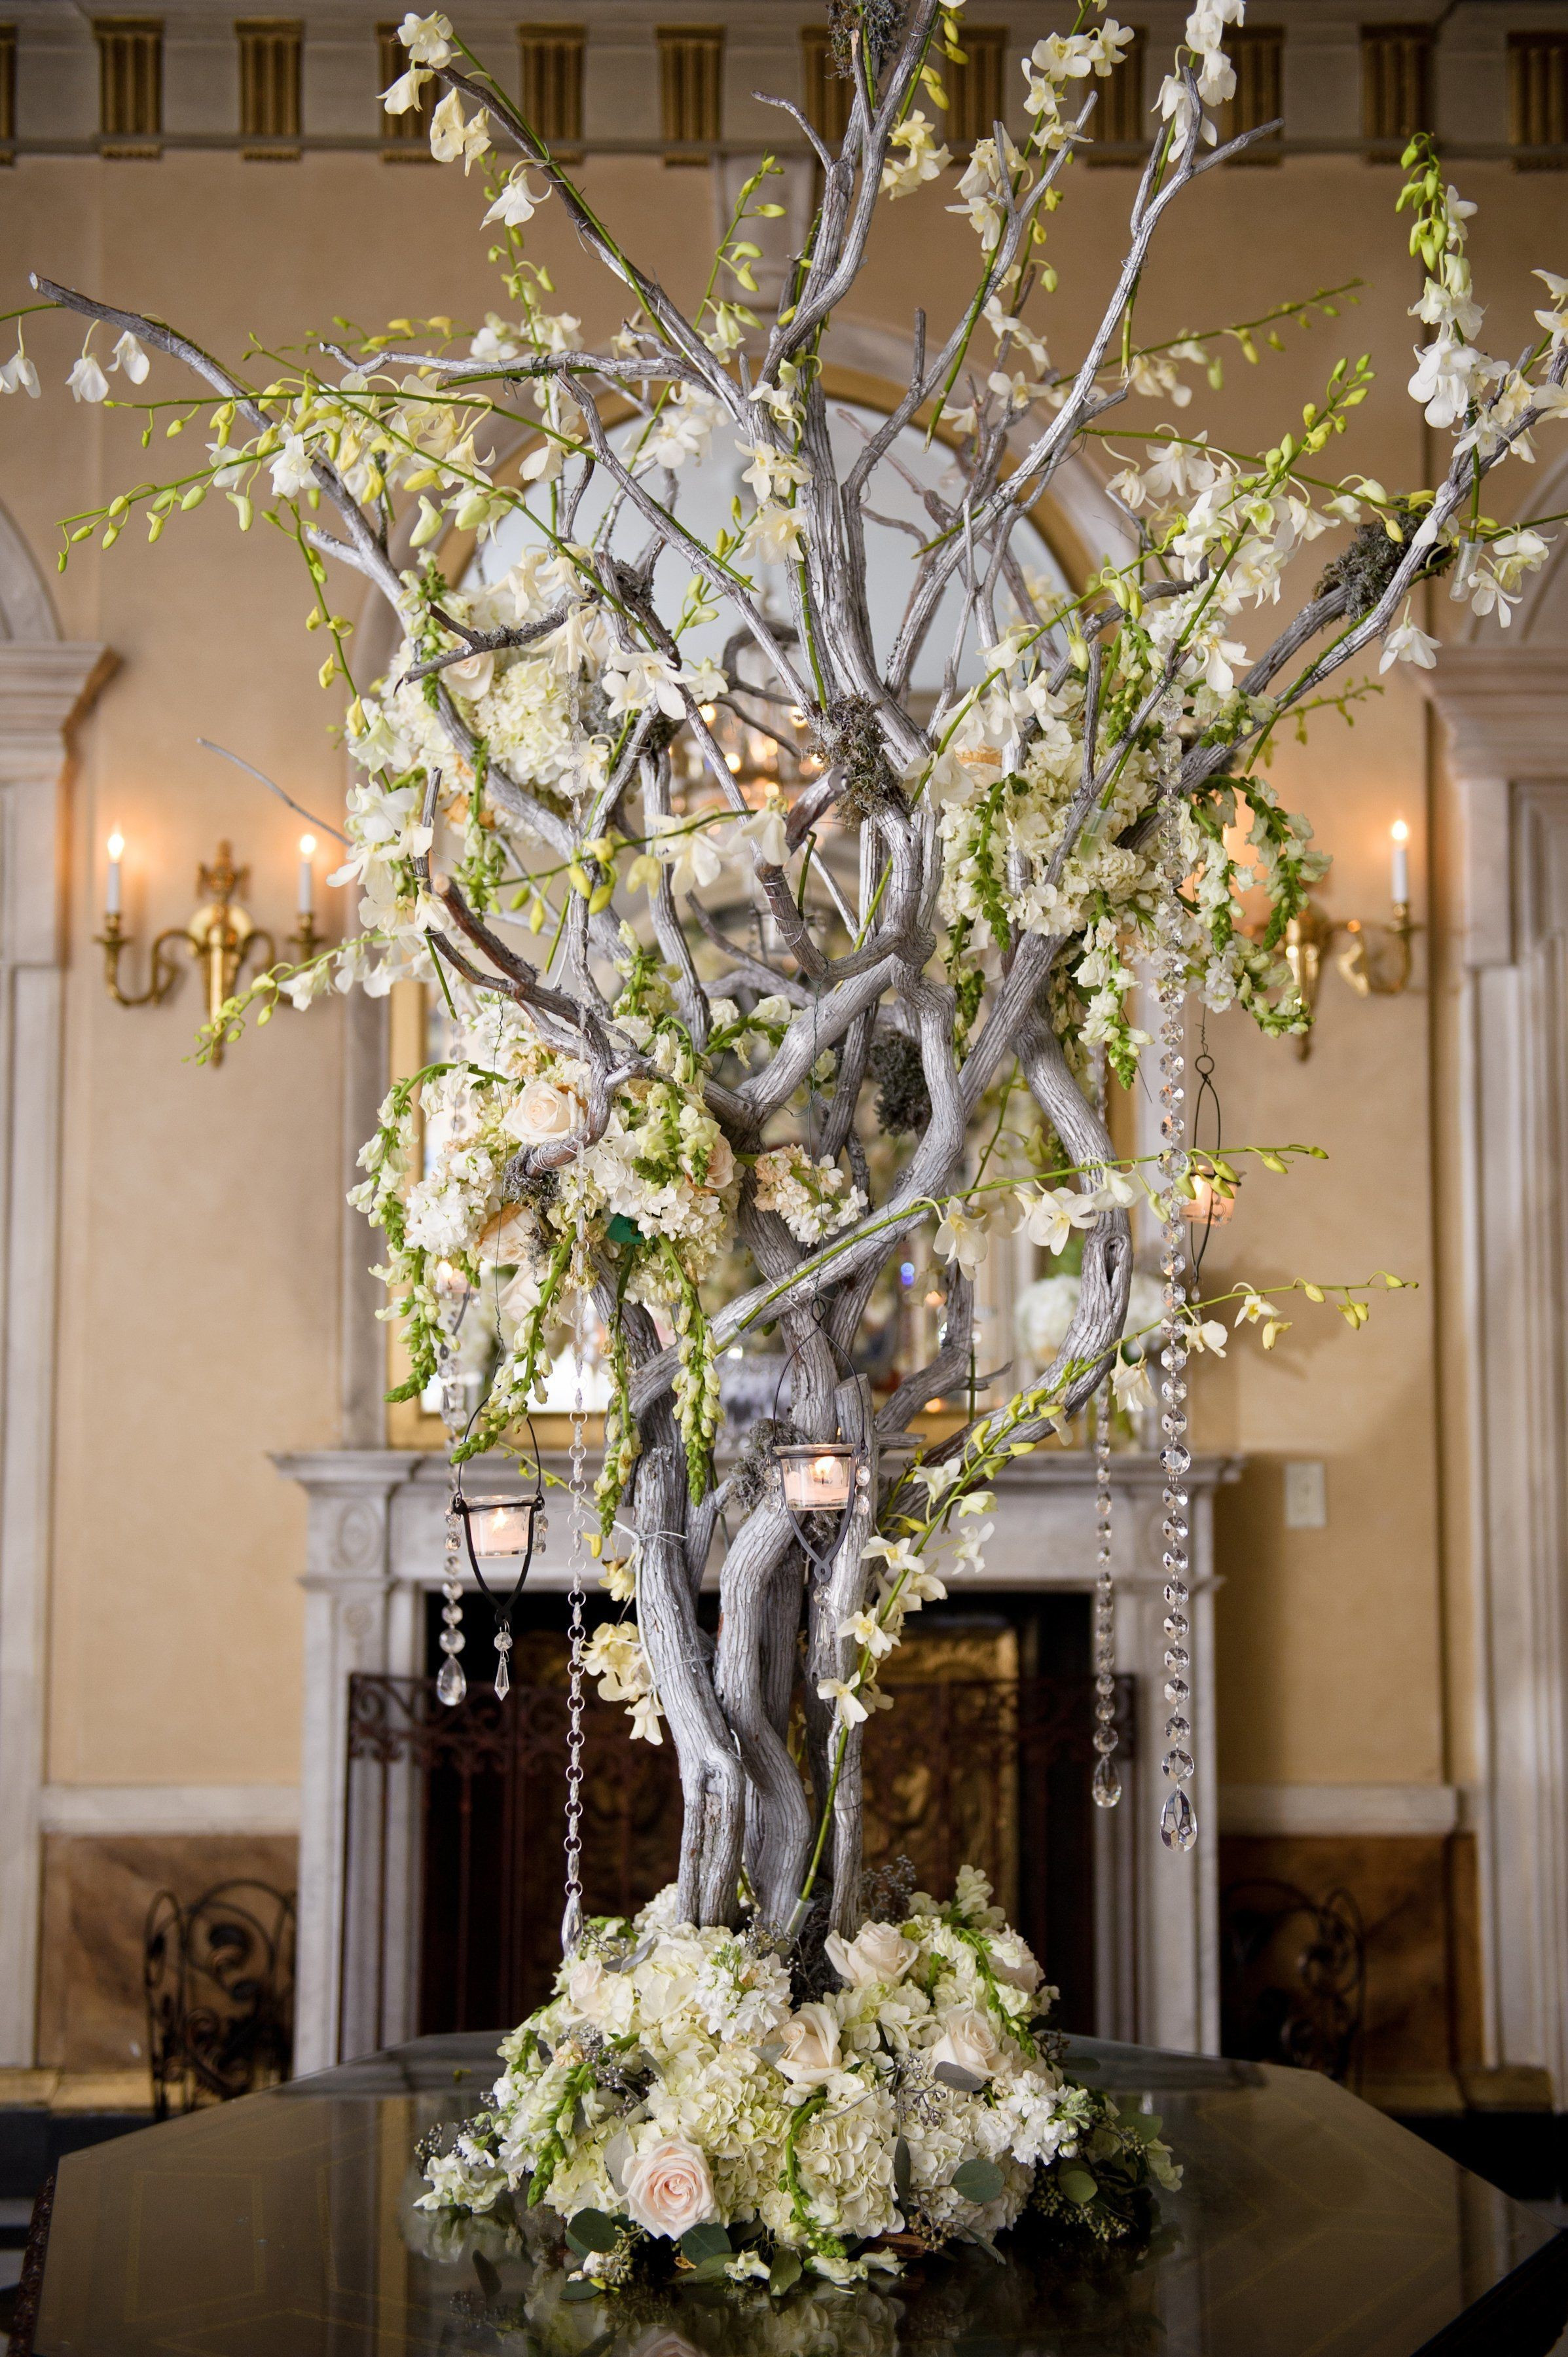 13 attractive Tall Vase Wedding Centerpiece Ideas 2024 free download tall vase wedding centerpiece ideas of decorative branches for weddings awesome tall vase centerpiece ideas throughout decorative branches for weddings best of a tall arrangement of manzanit